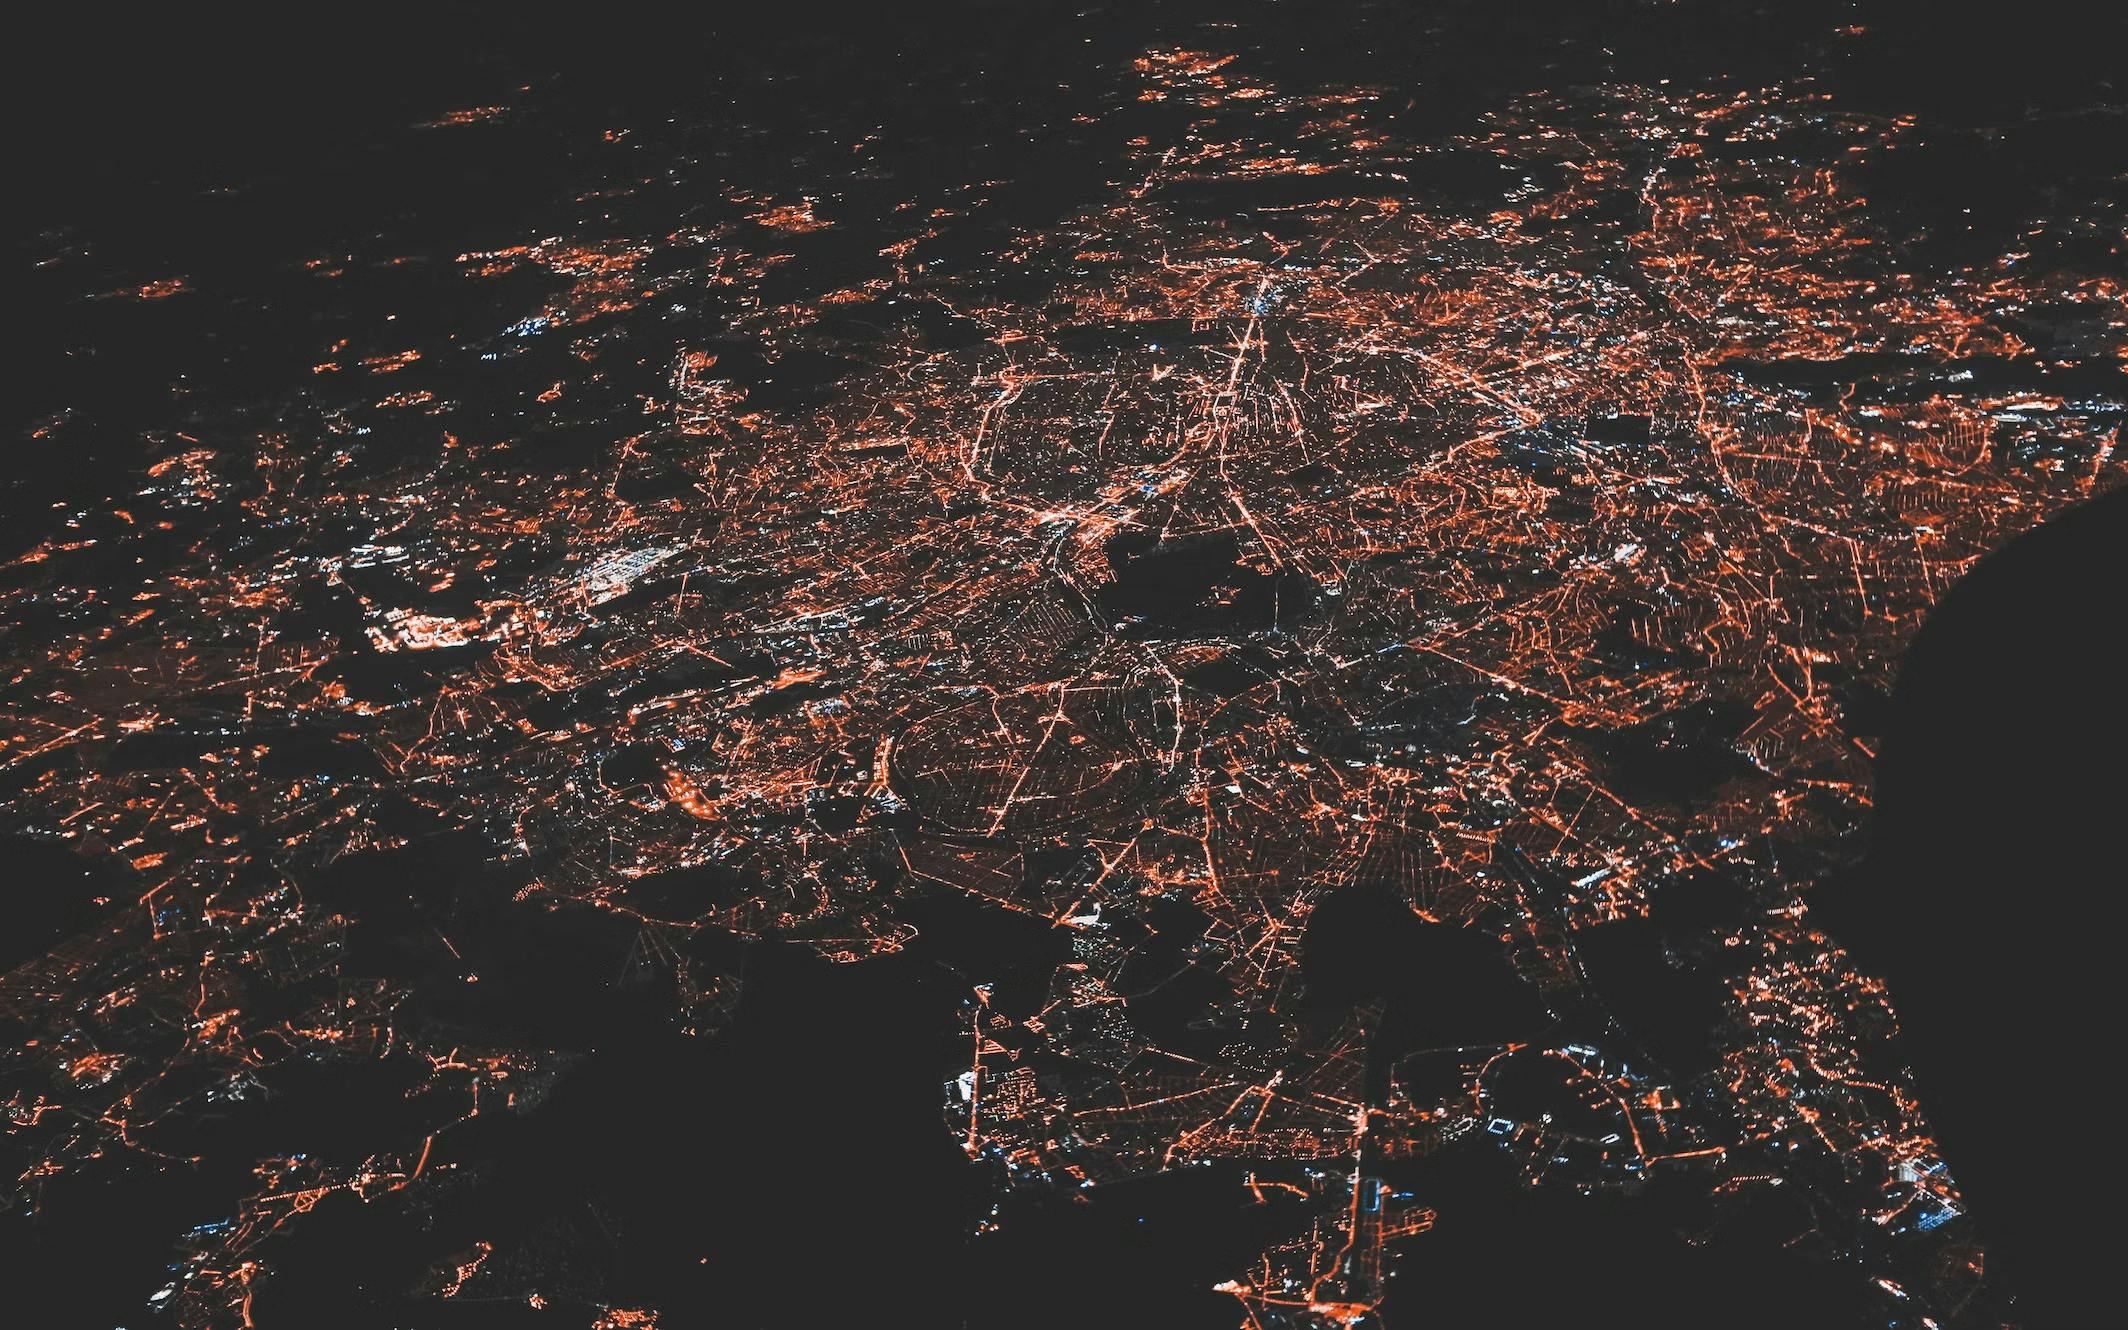 birdseye view of a lit up city at night